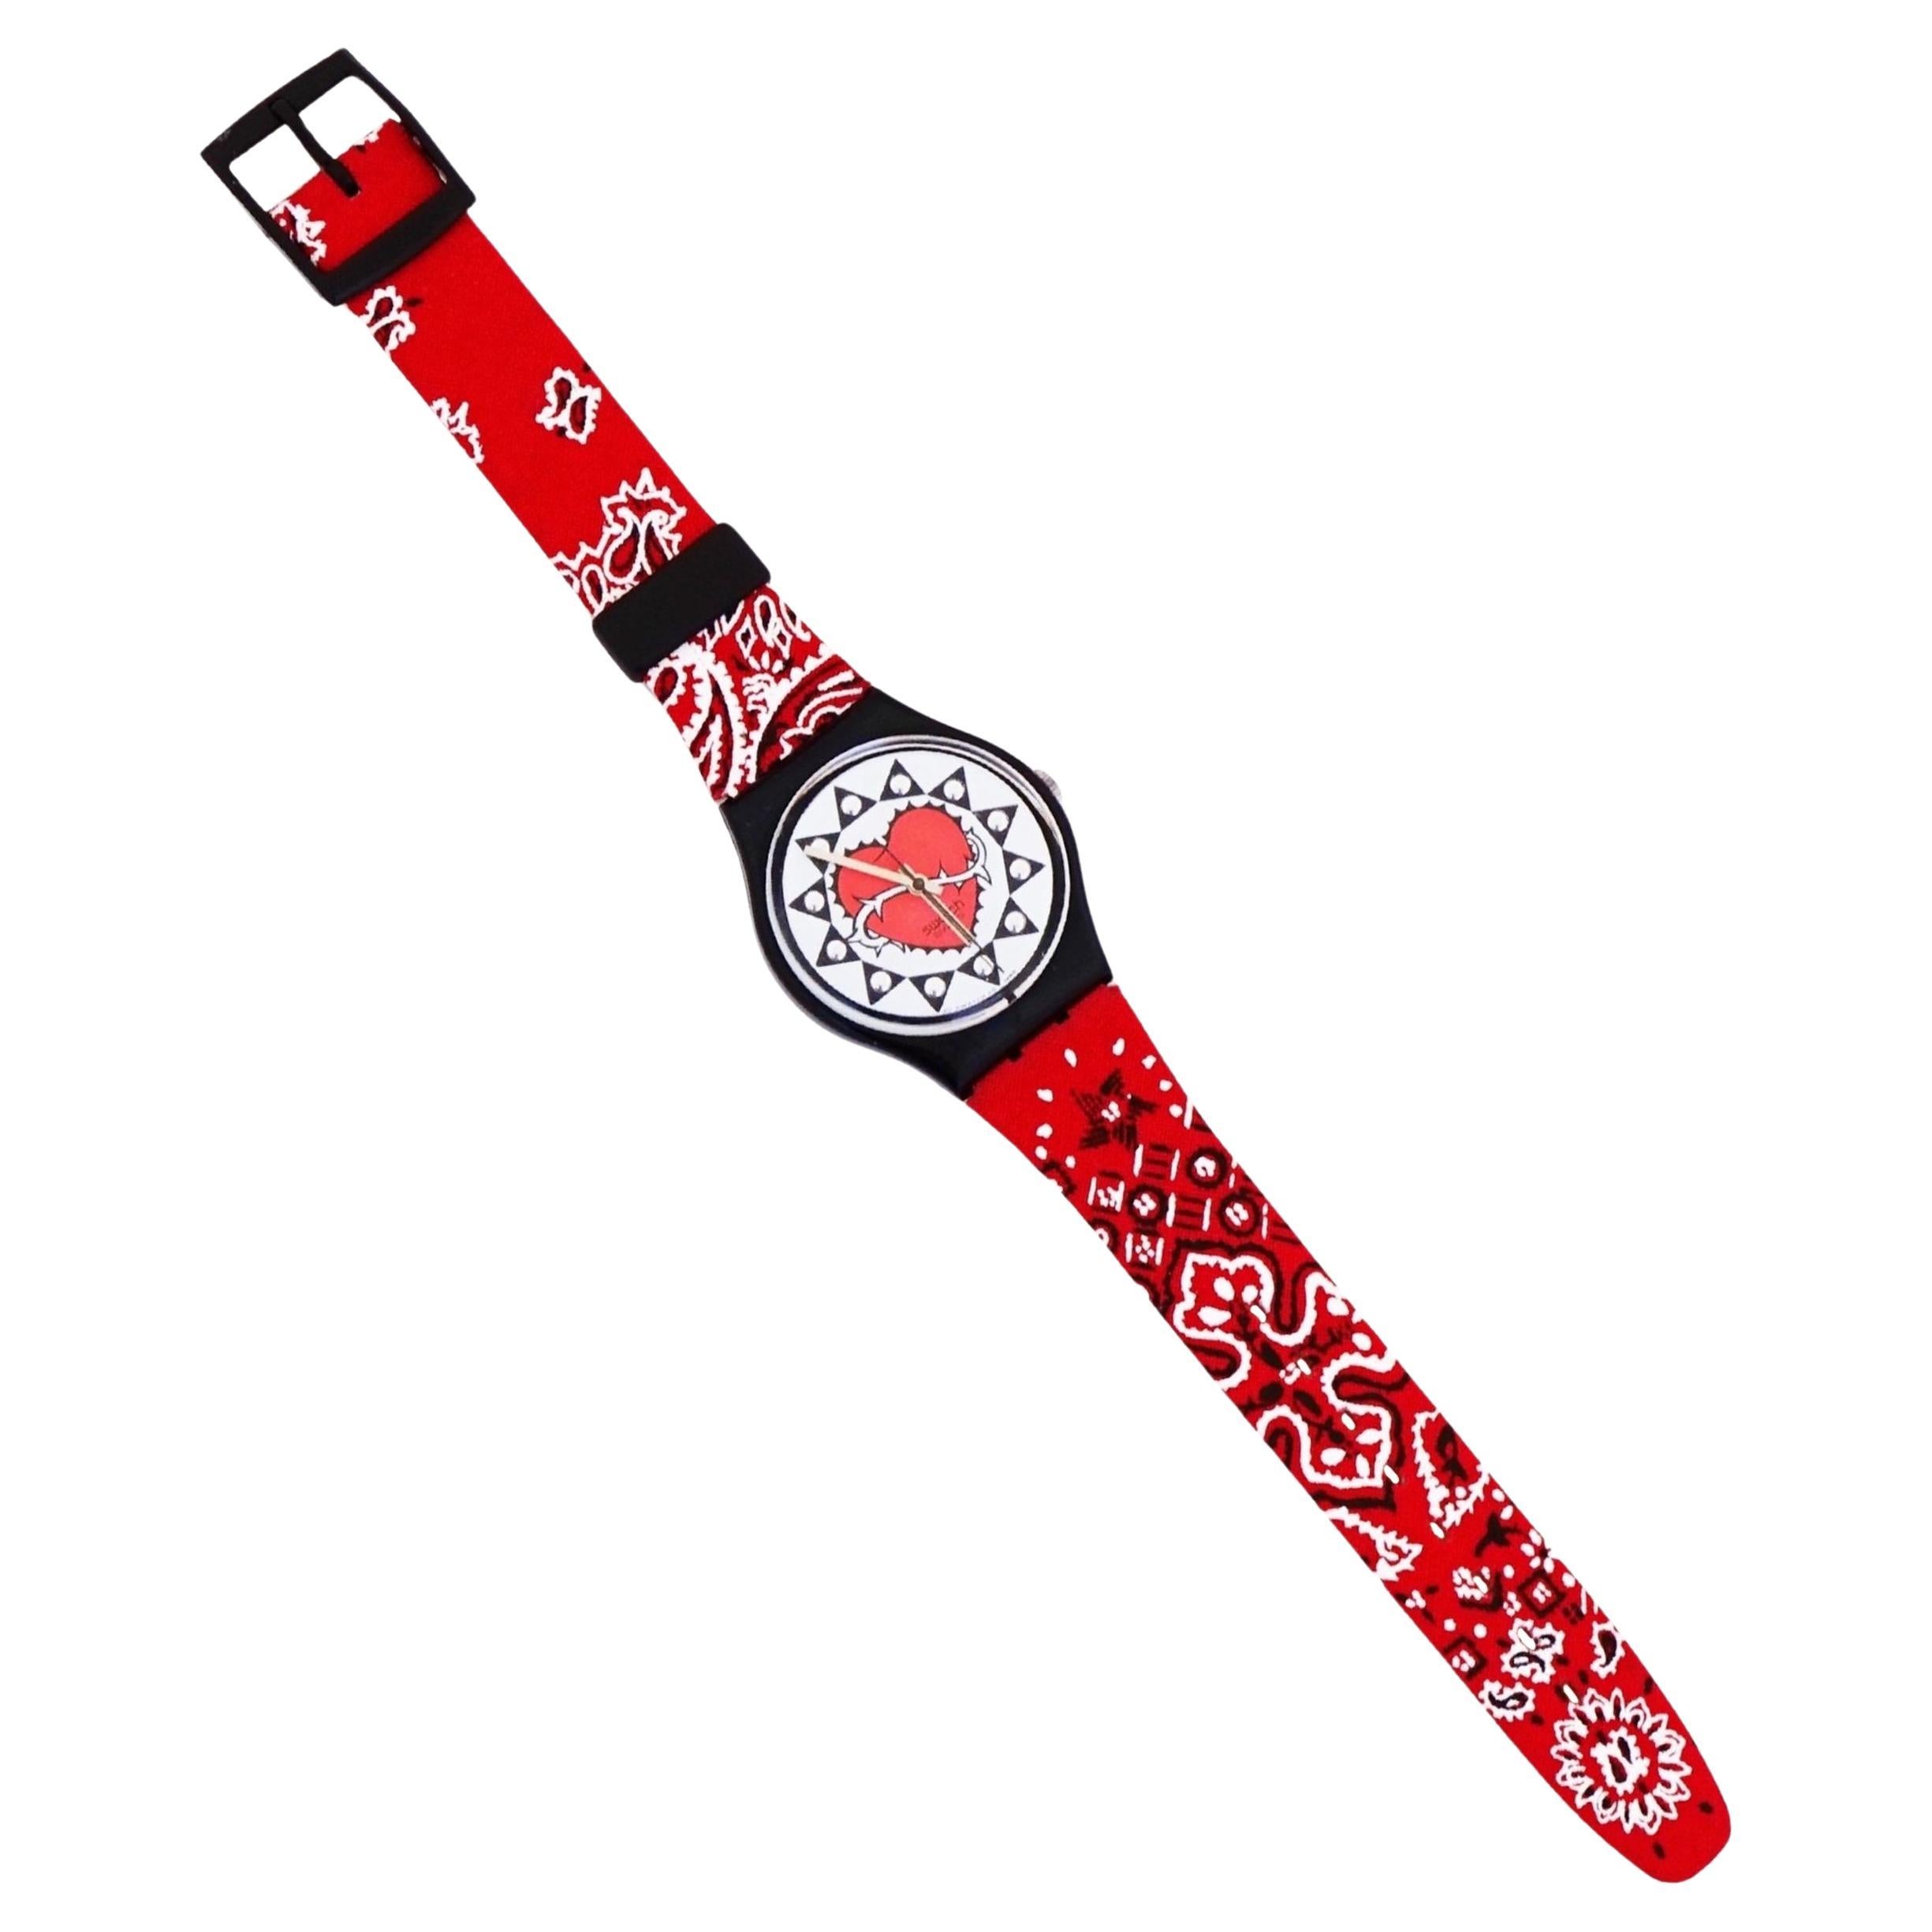 Red Bandana "Trash" Wristwatch With Heart Face and Leather Band By Swatch, 1990s For Sale